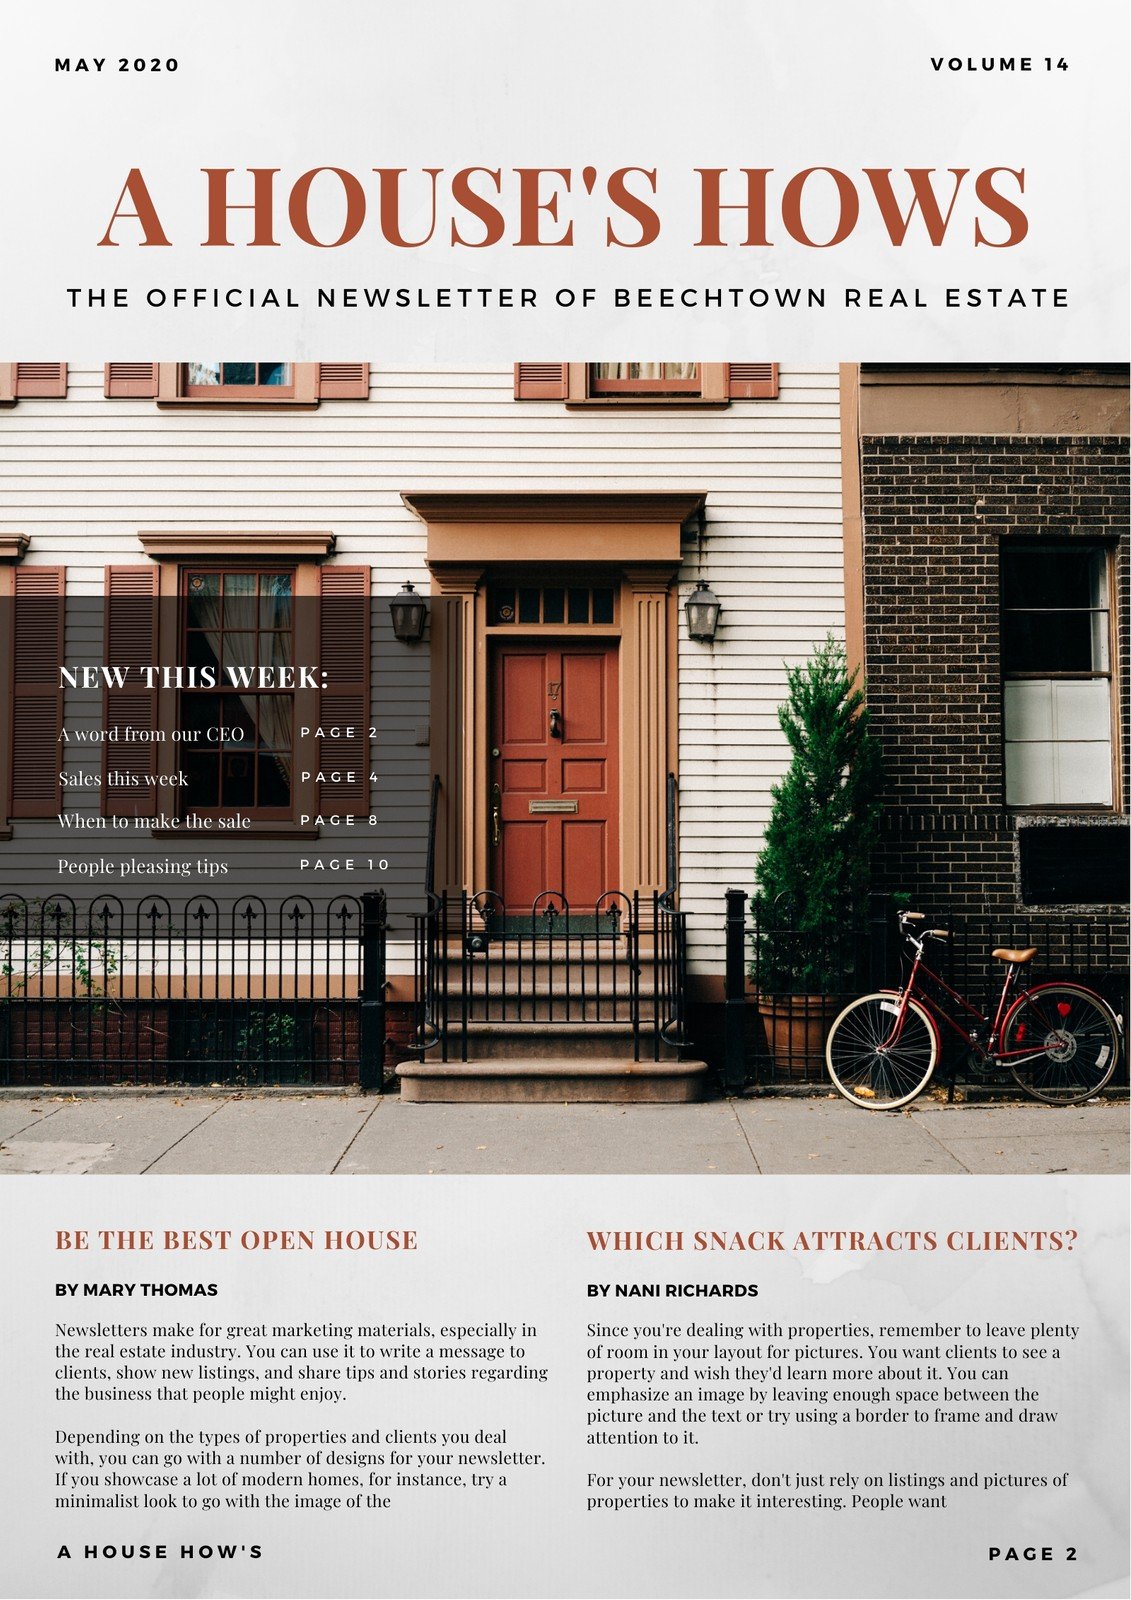 Customize 35 Real Estate Newsletters Templates Online Canva